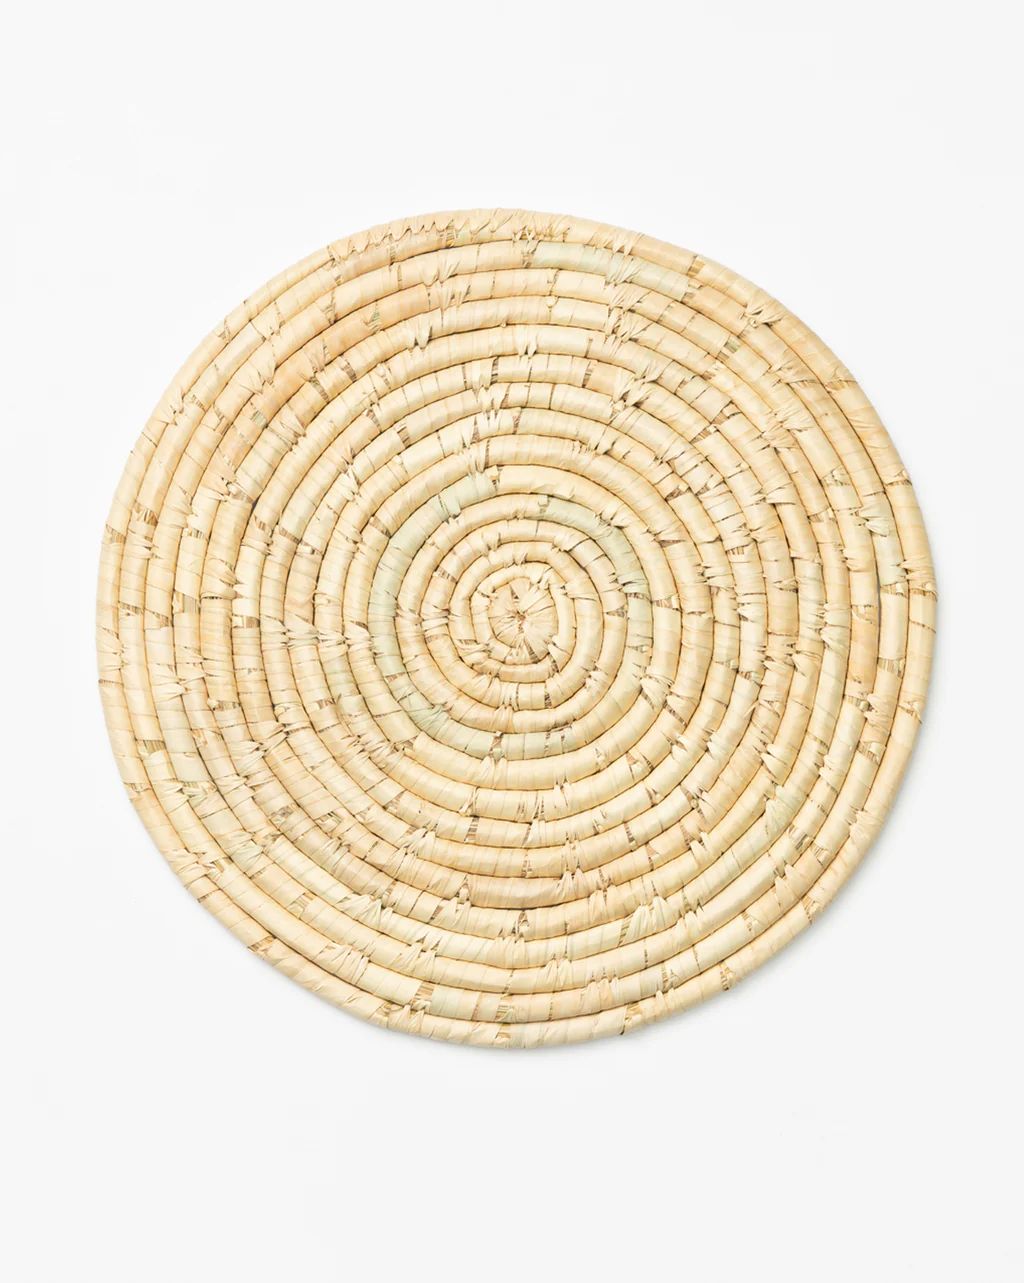 Woven Grass Placemat | McGee & Co.